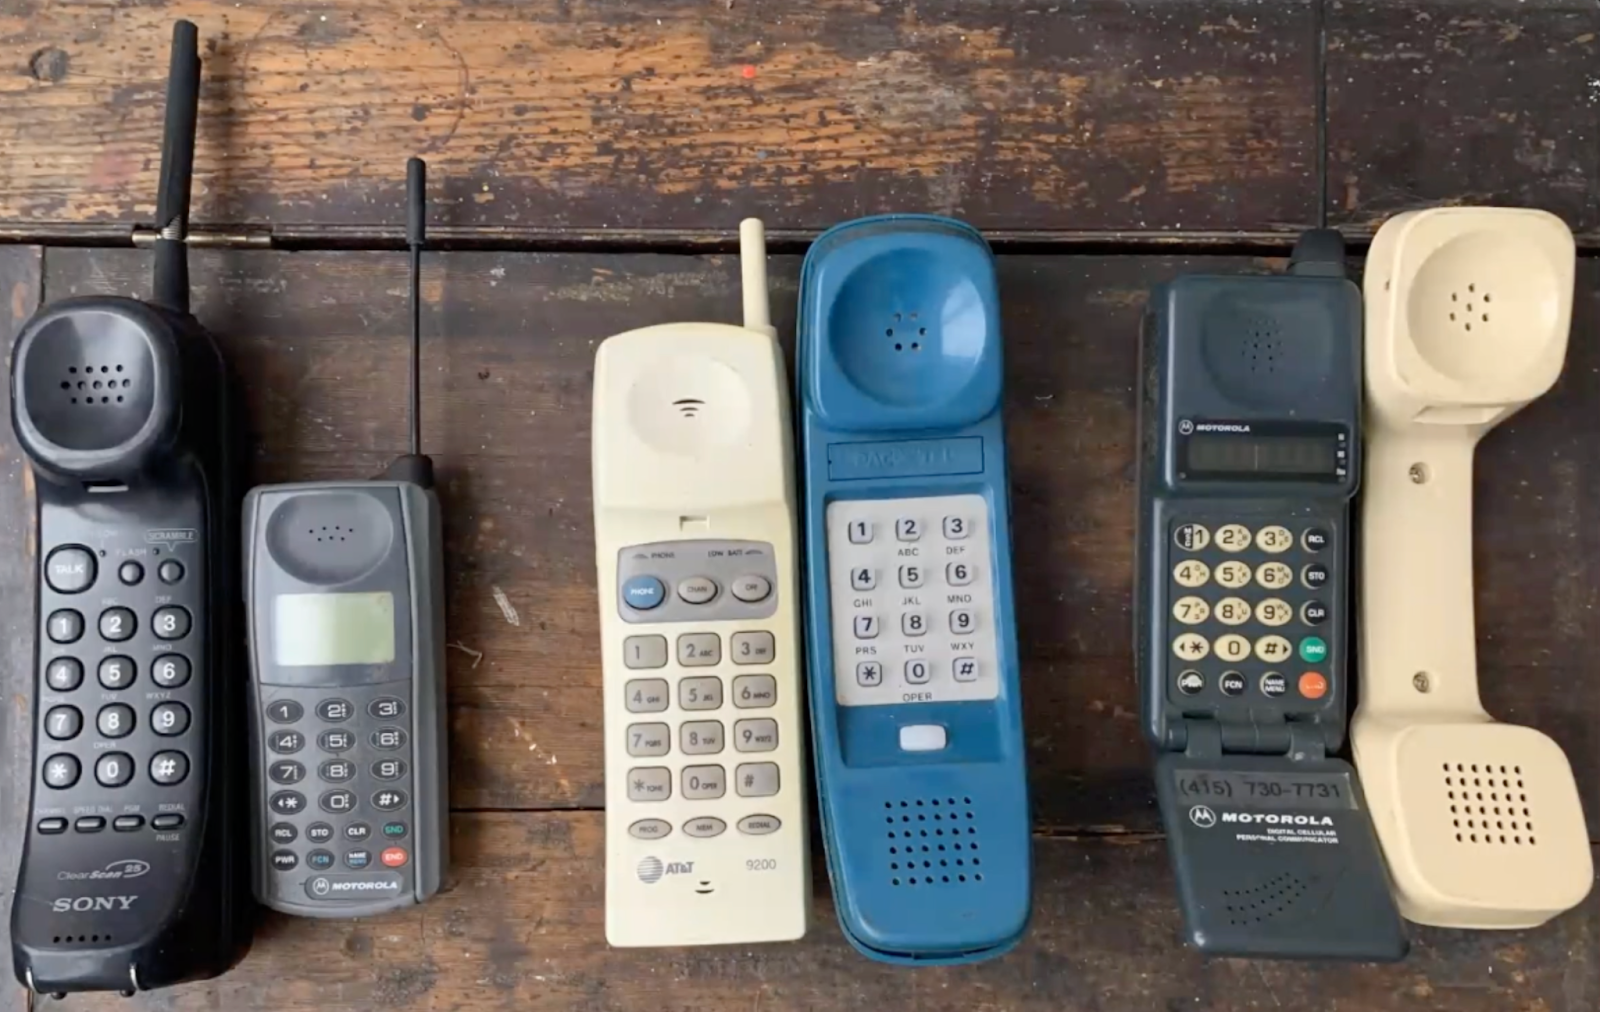 An image of phones through the years lined up, including cordless home telephones, motorola cell phones, and rotary phone receivers